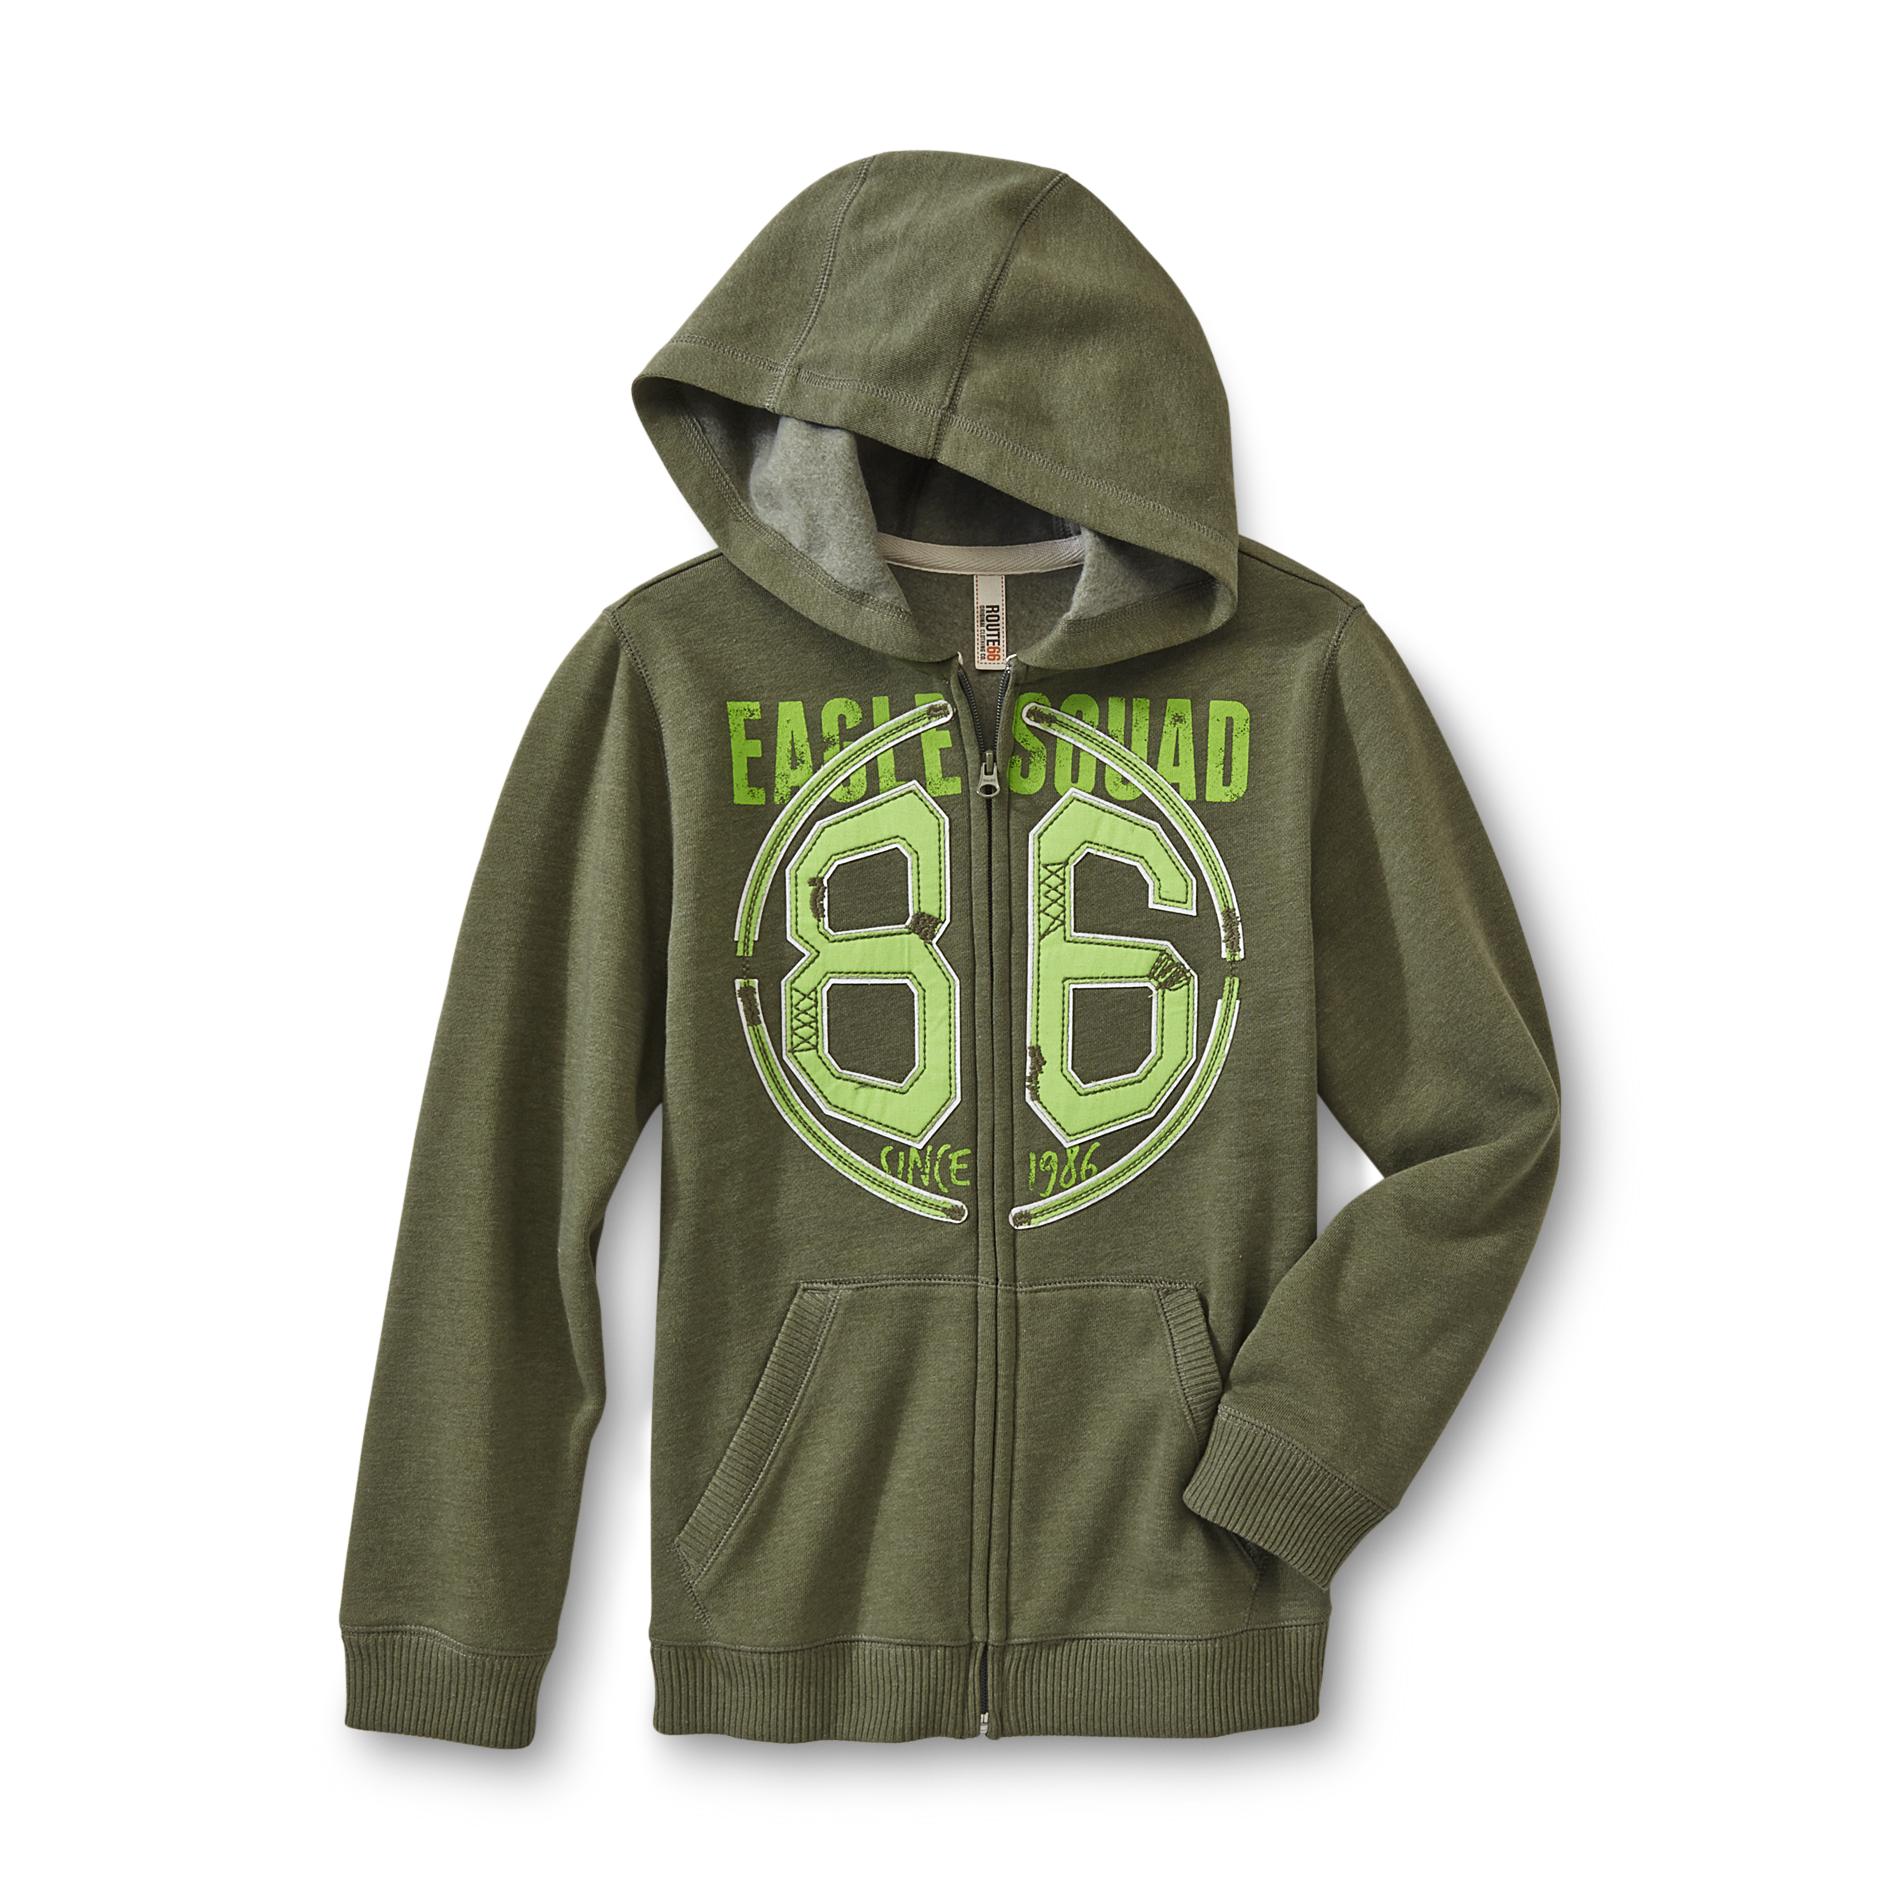 Route 66 Boy's Graphic Hoodie Jacket - Eagle Squad 86